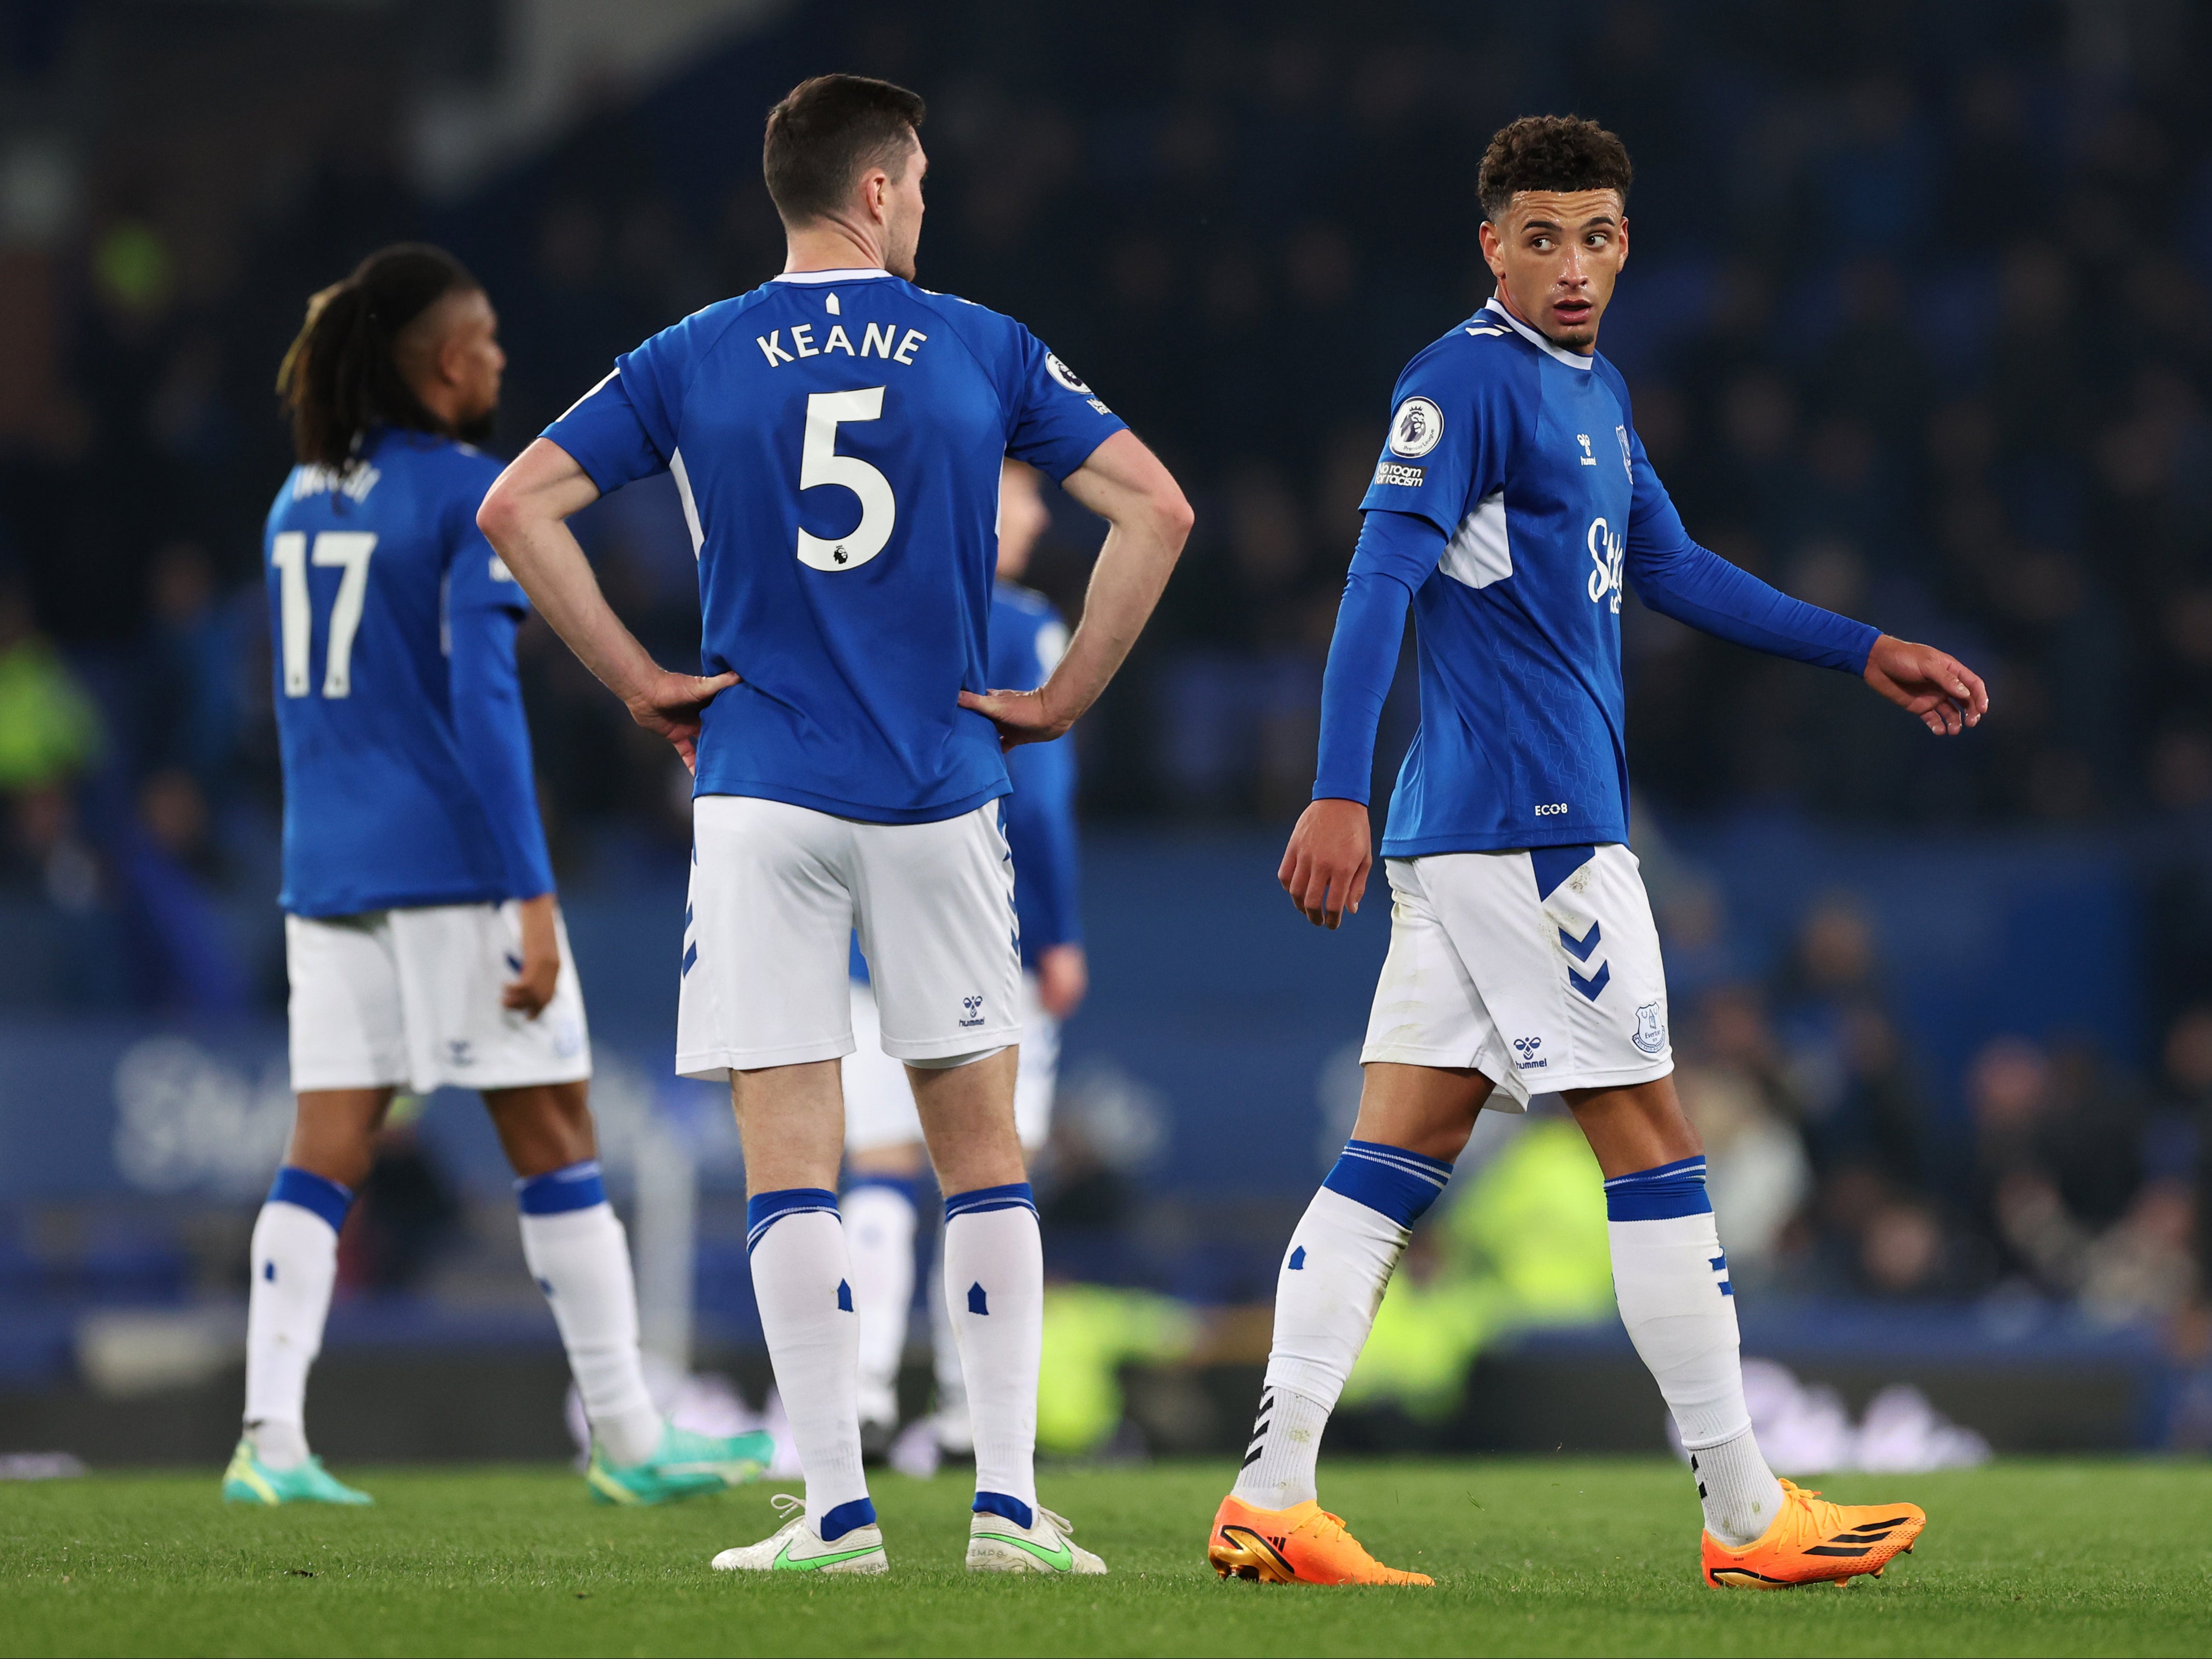 A win against Bournemouth would be enough to ensure Everton’s safety